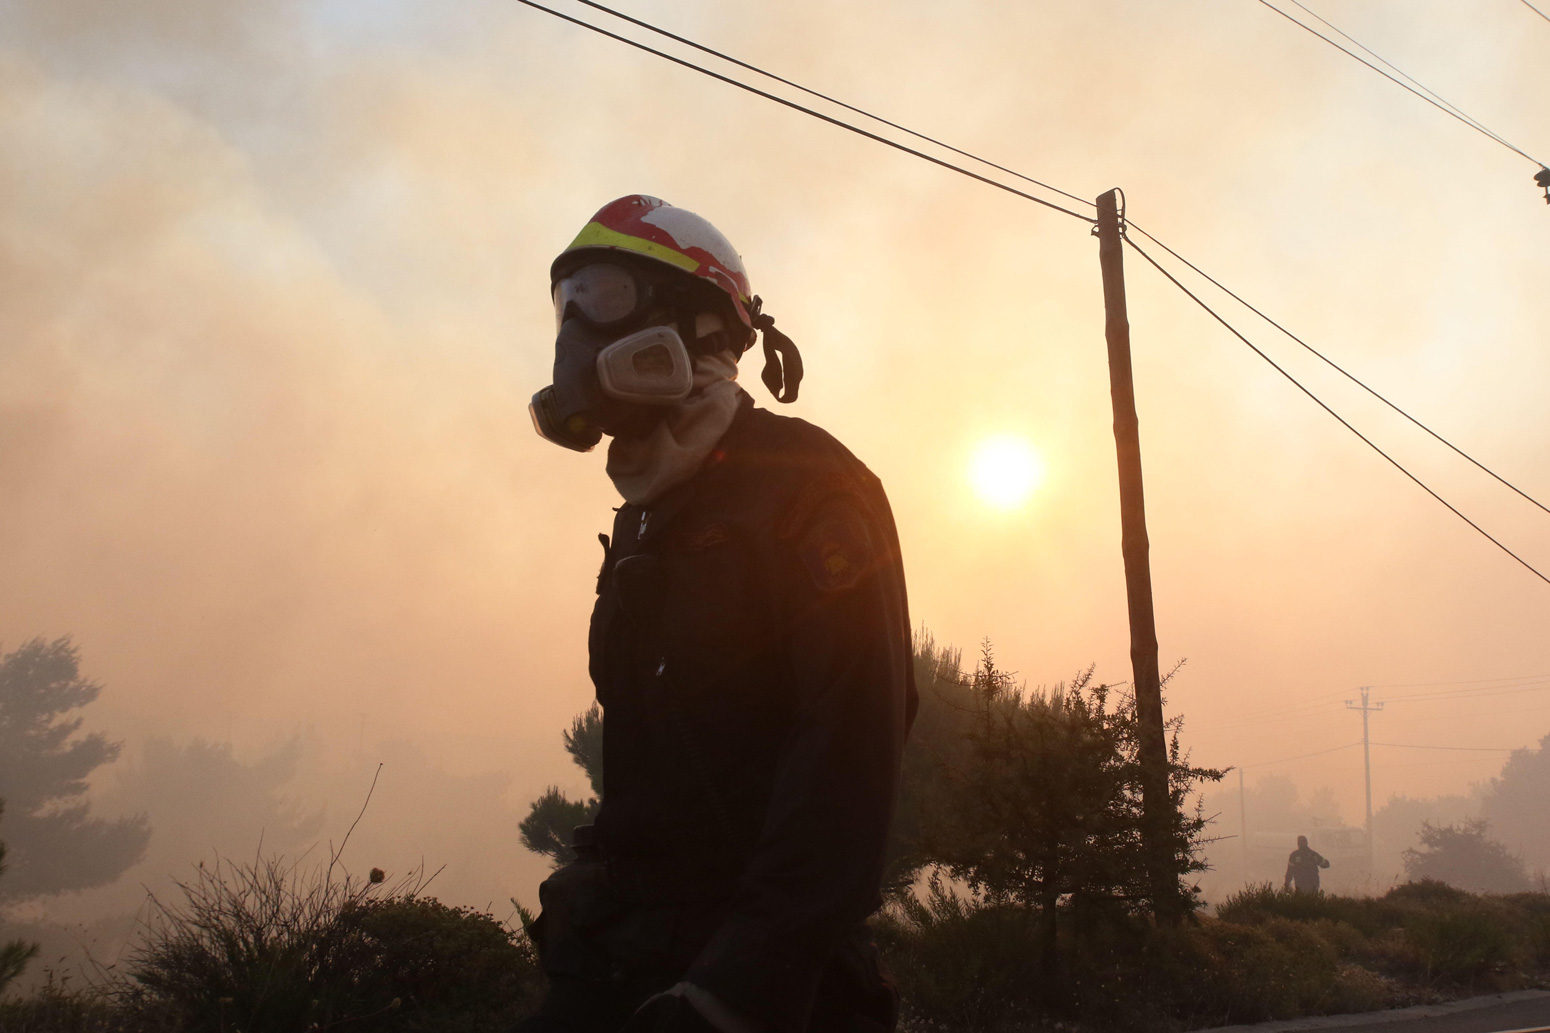 A firefighter is pictured during a forest fire at Varnava village, Kalamos, Greece (Aug. 14, 2017).